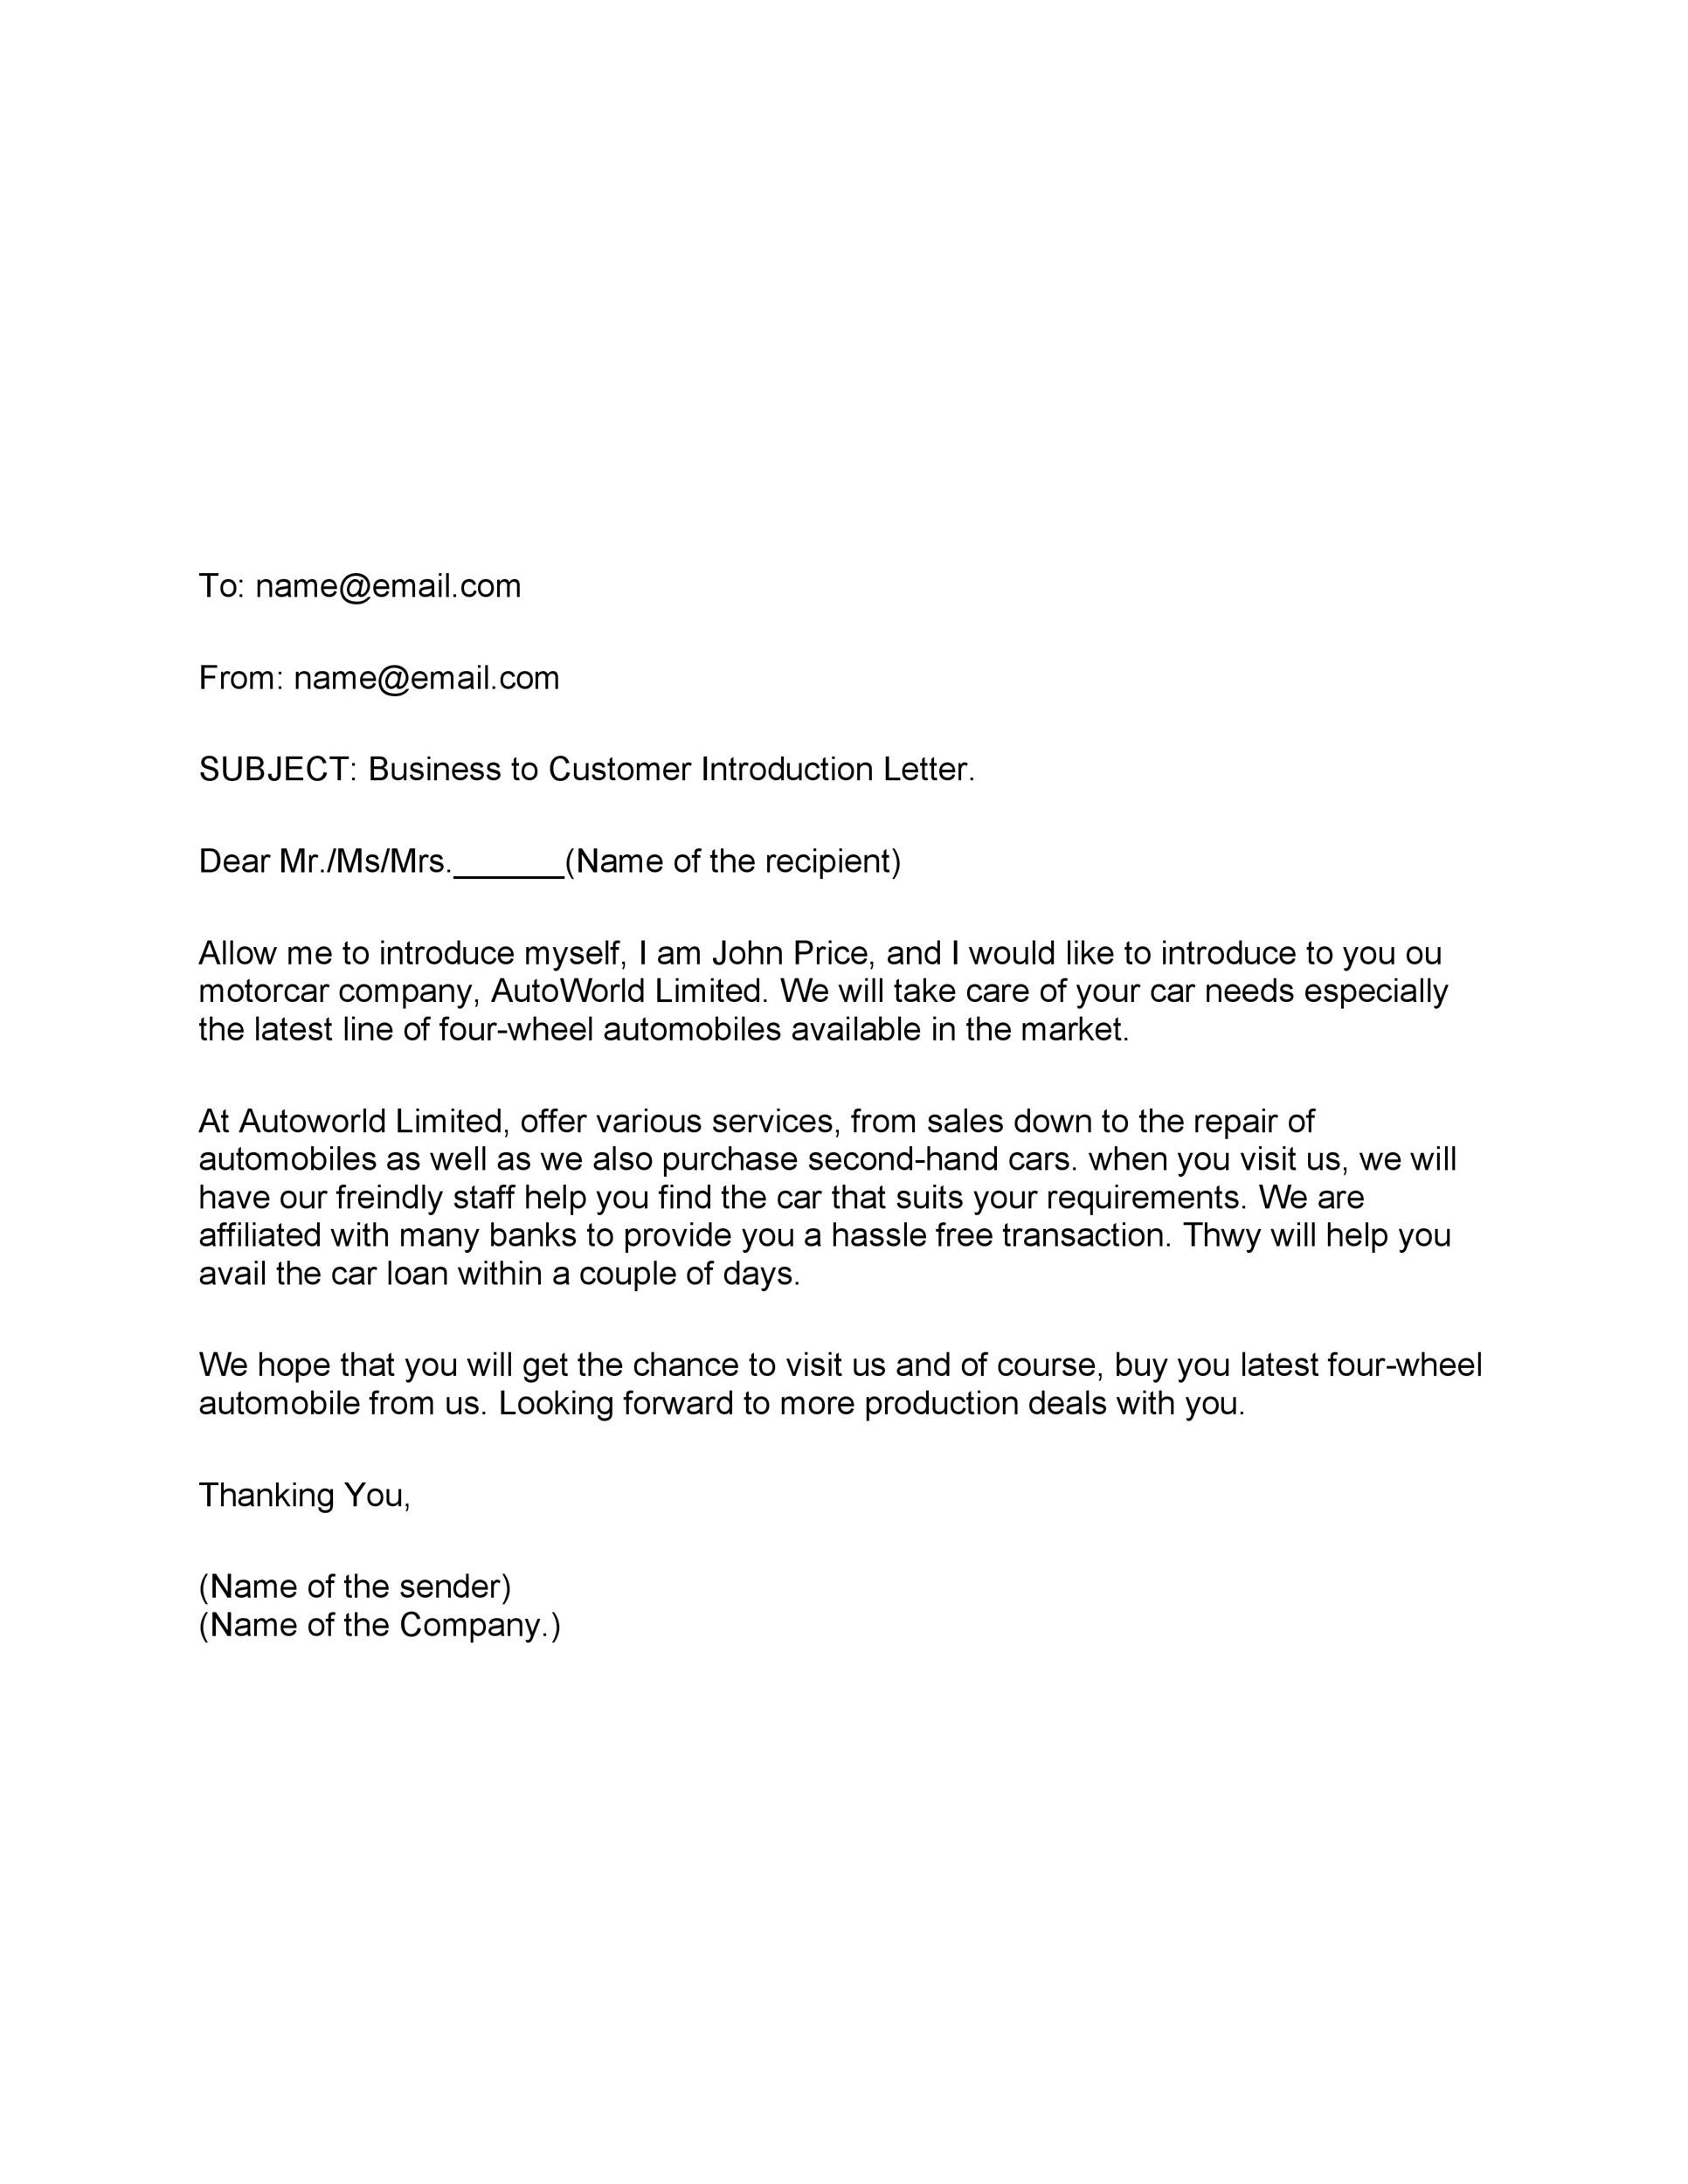 Free business introduction letter 08